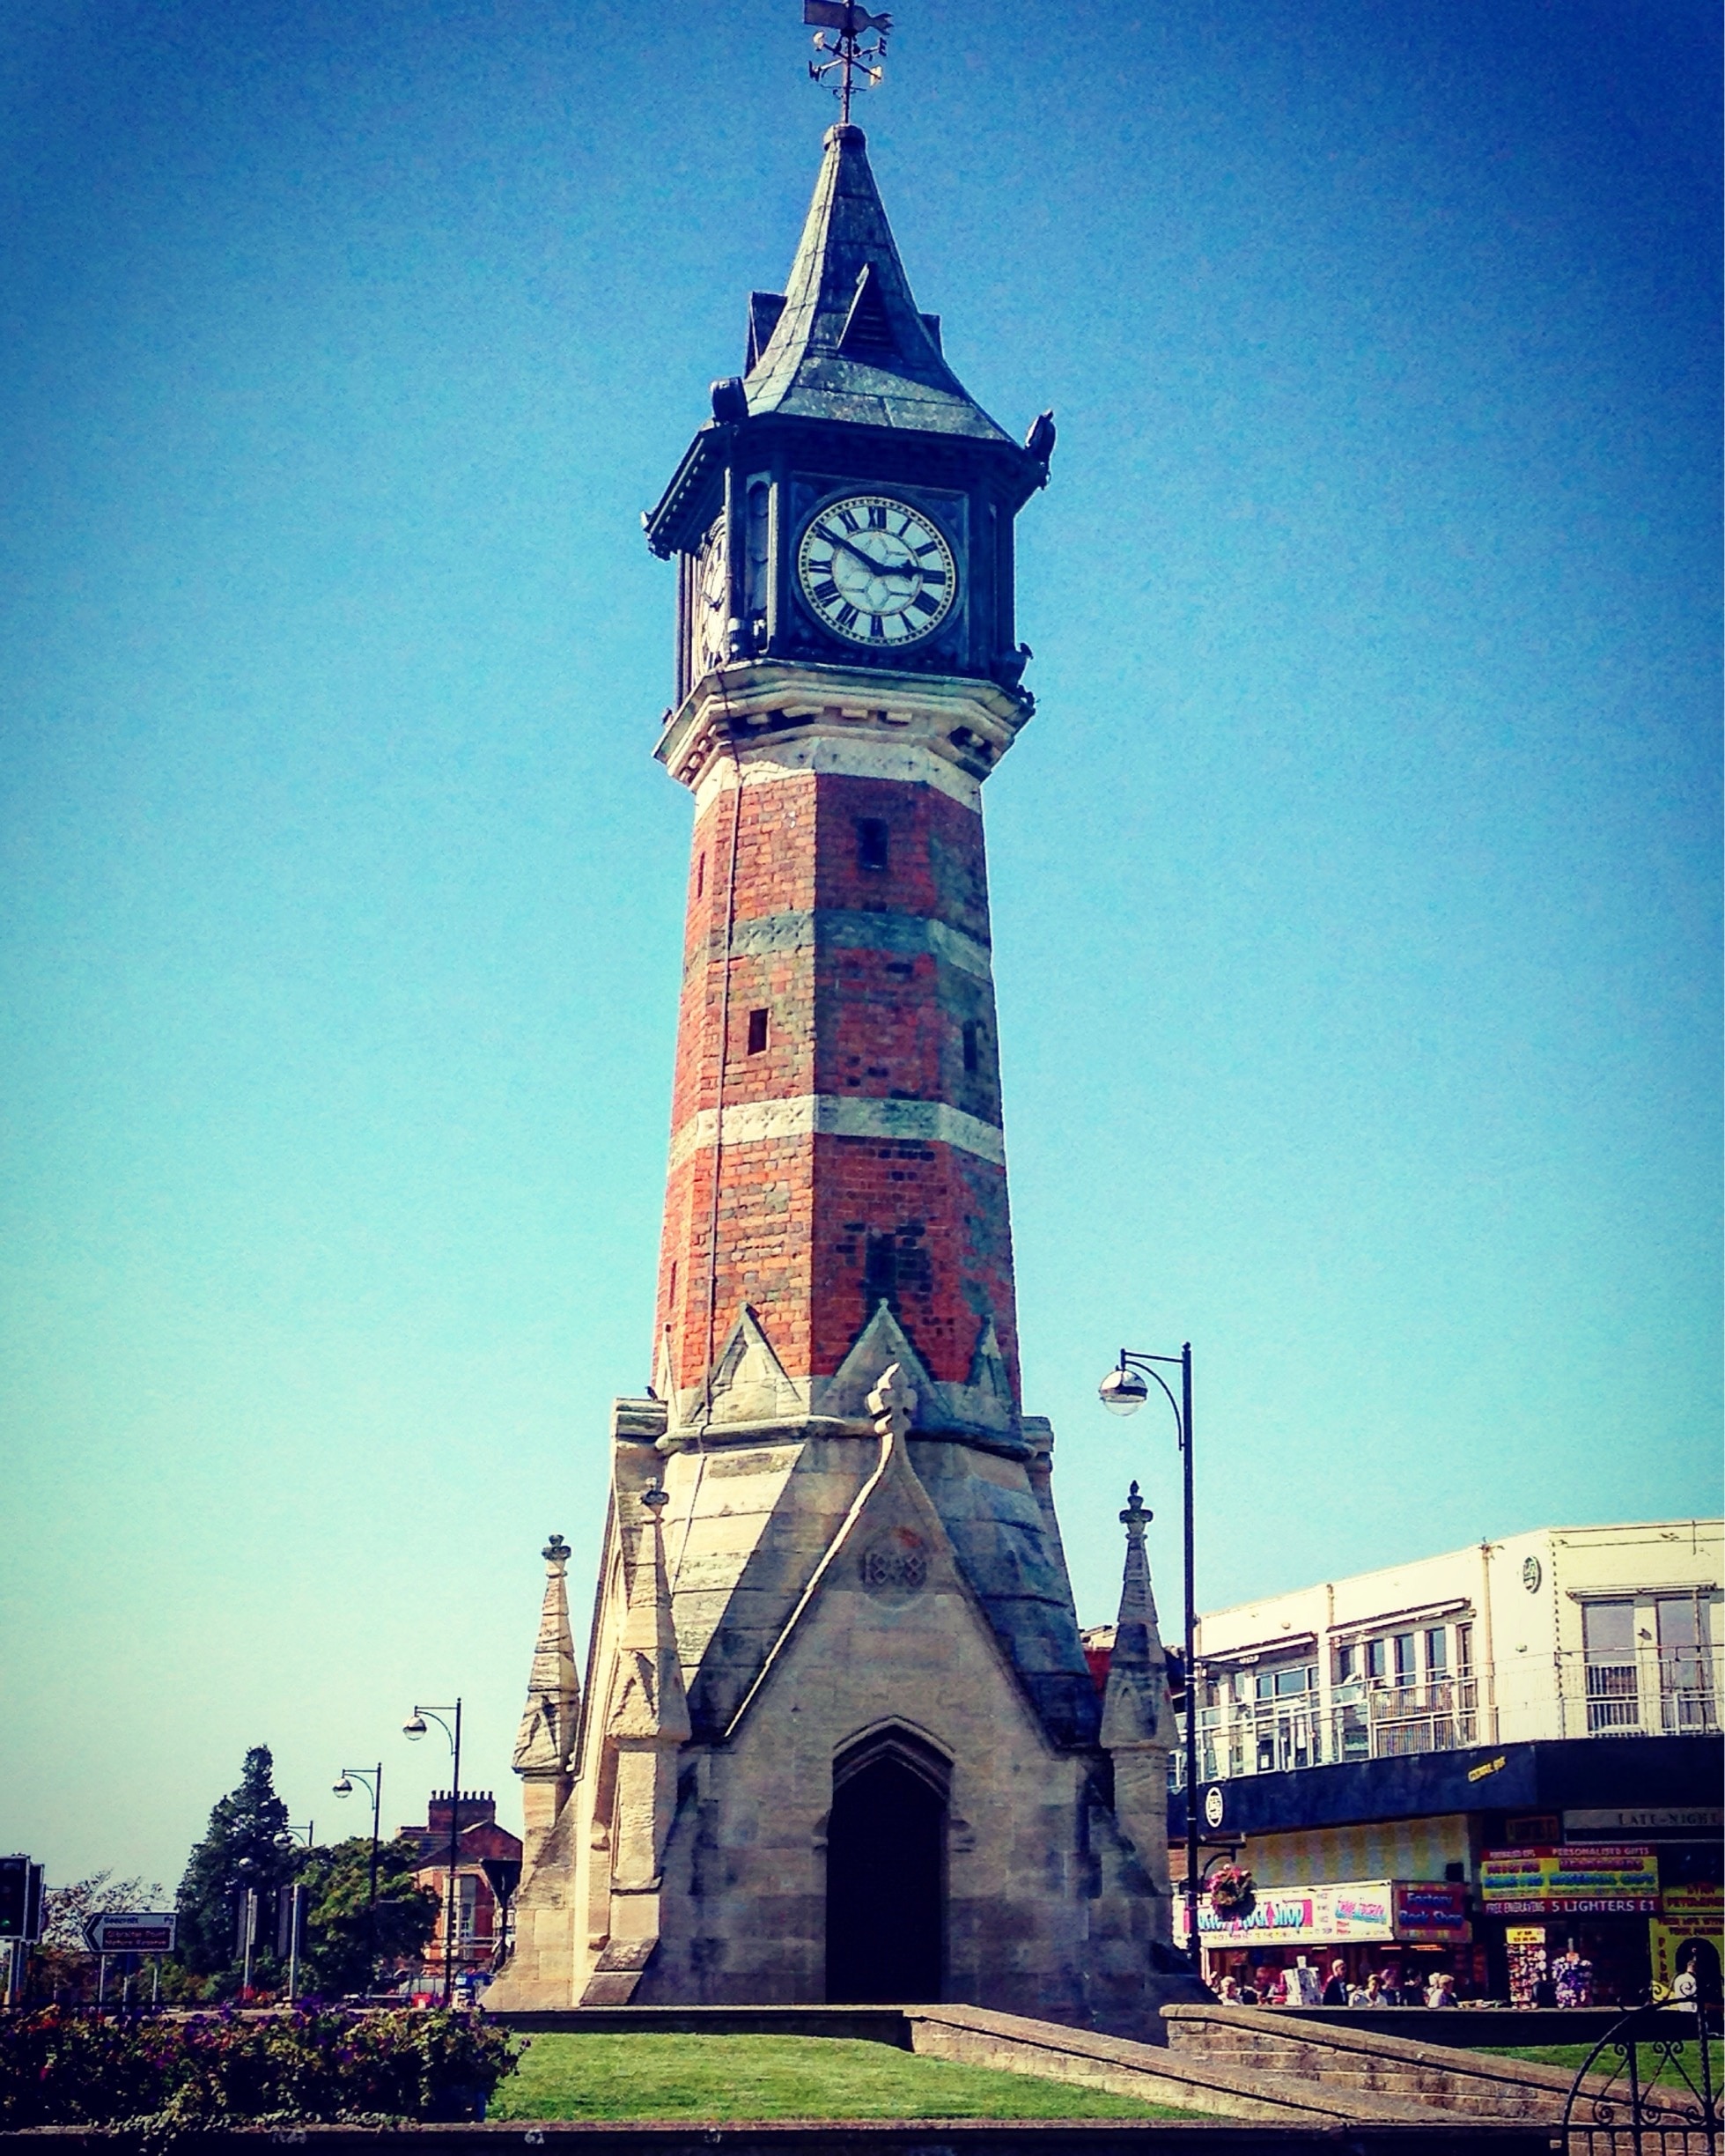 The Skegness clock tower. 